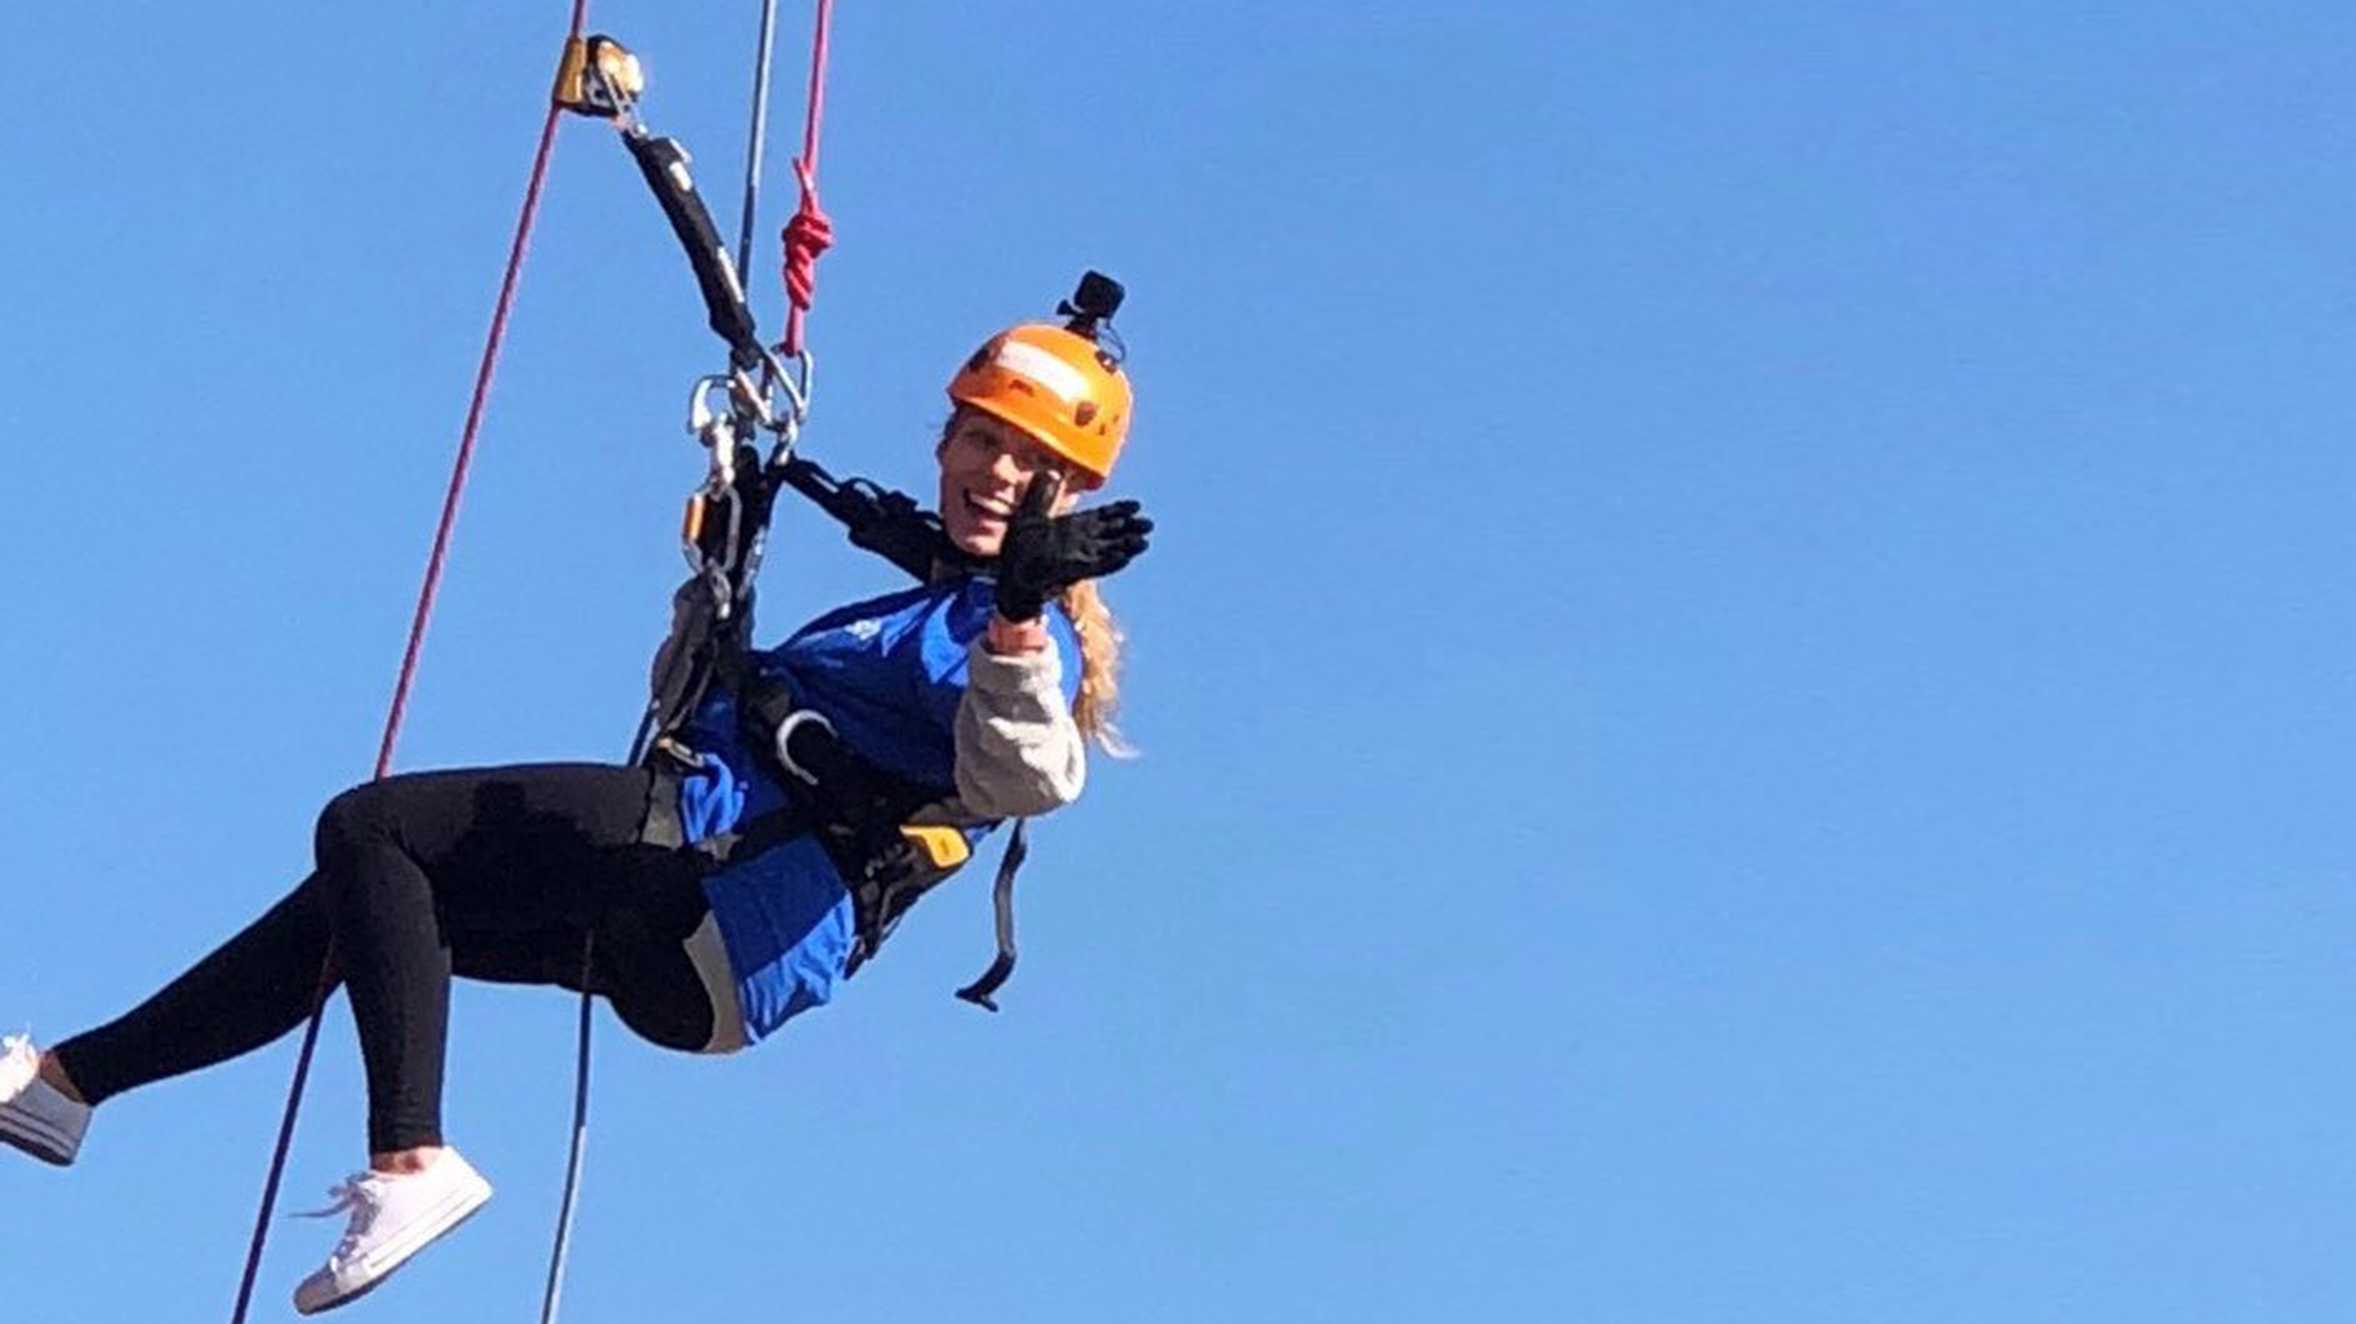 Wishgranter Tequilla abseiling in support of Make-A-Wish